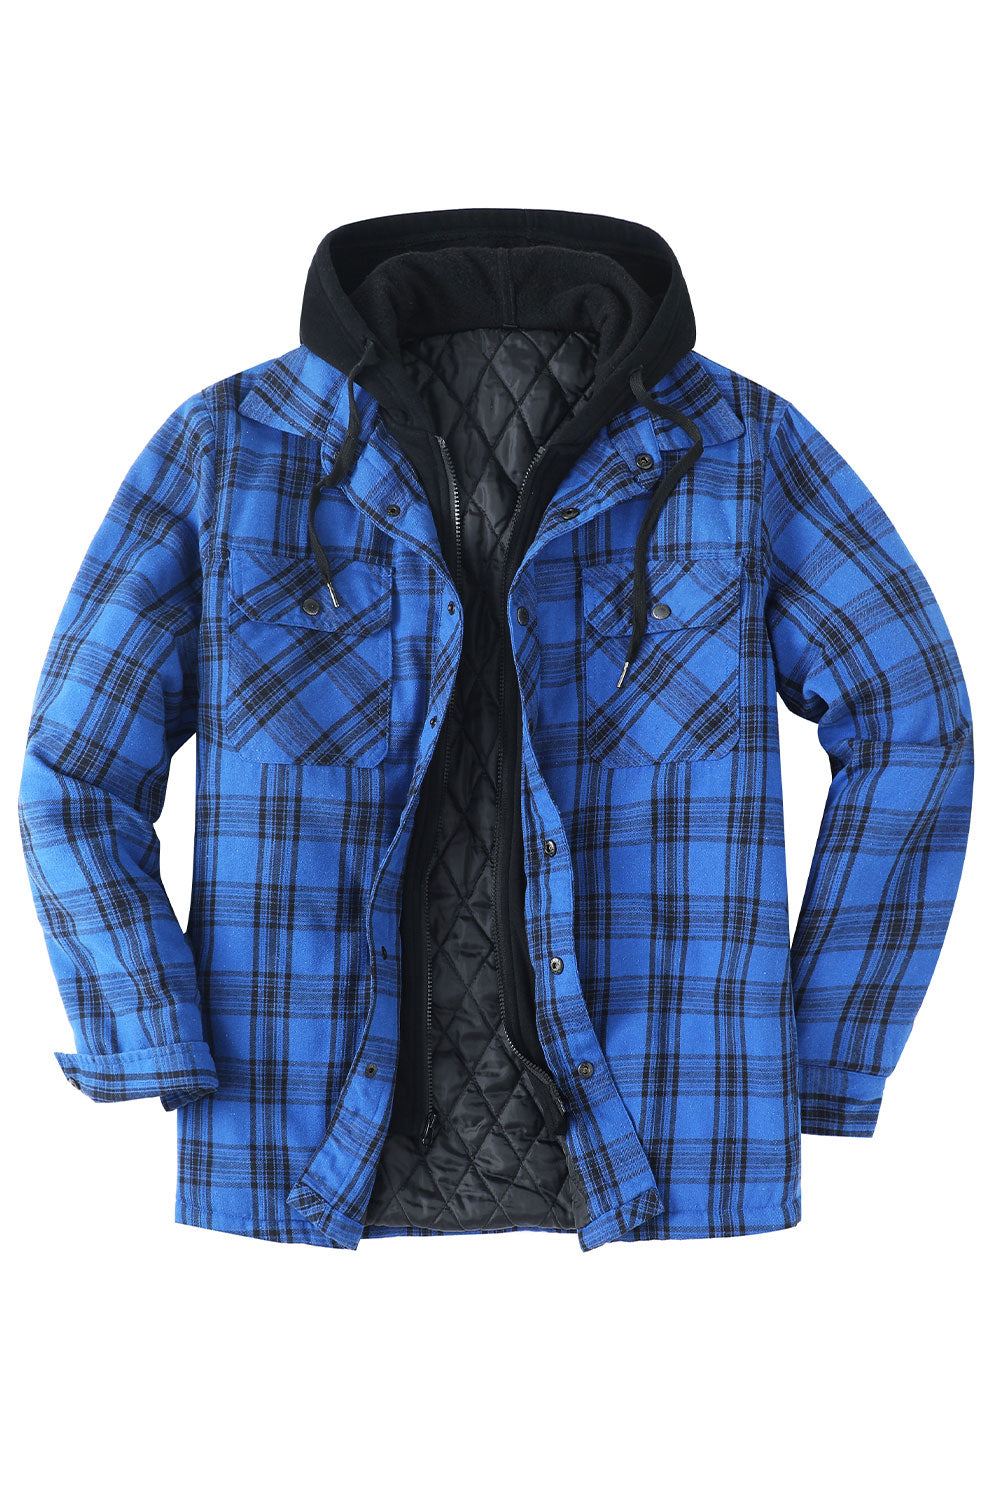 30%OFF On Father's Day Sale – FlannelGo